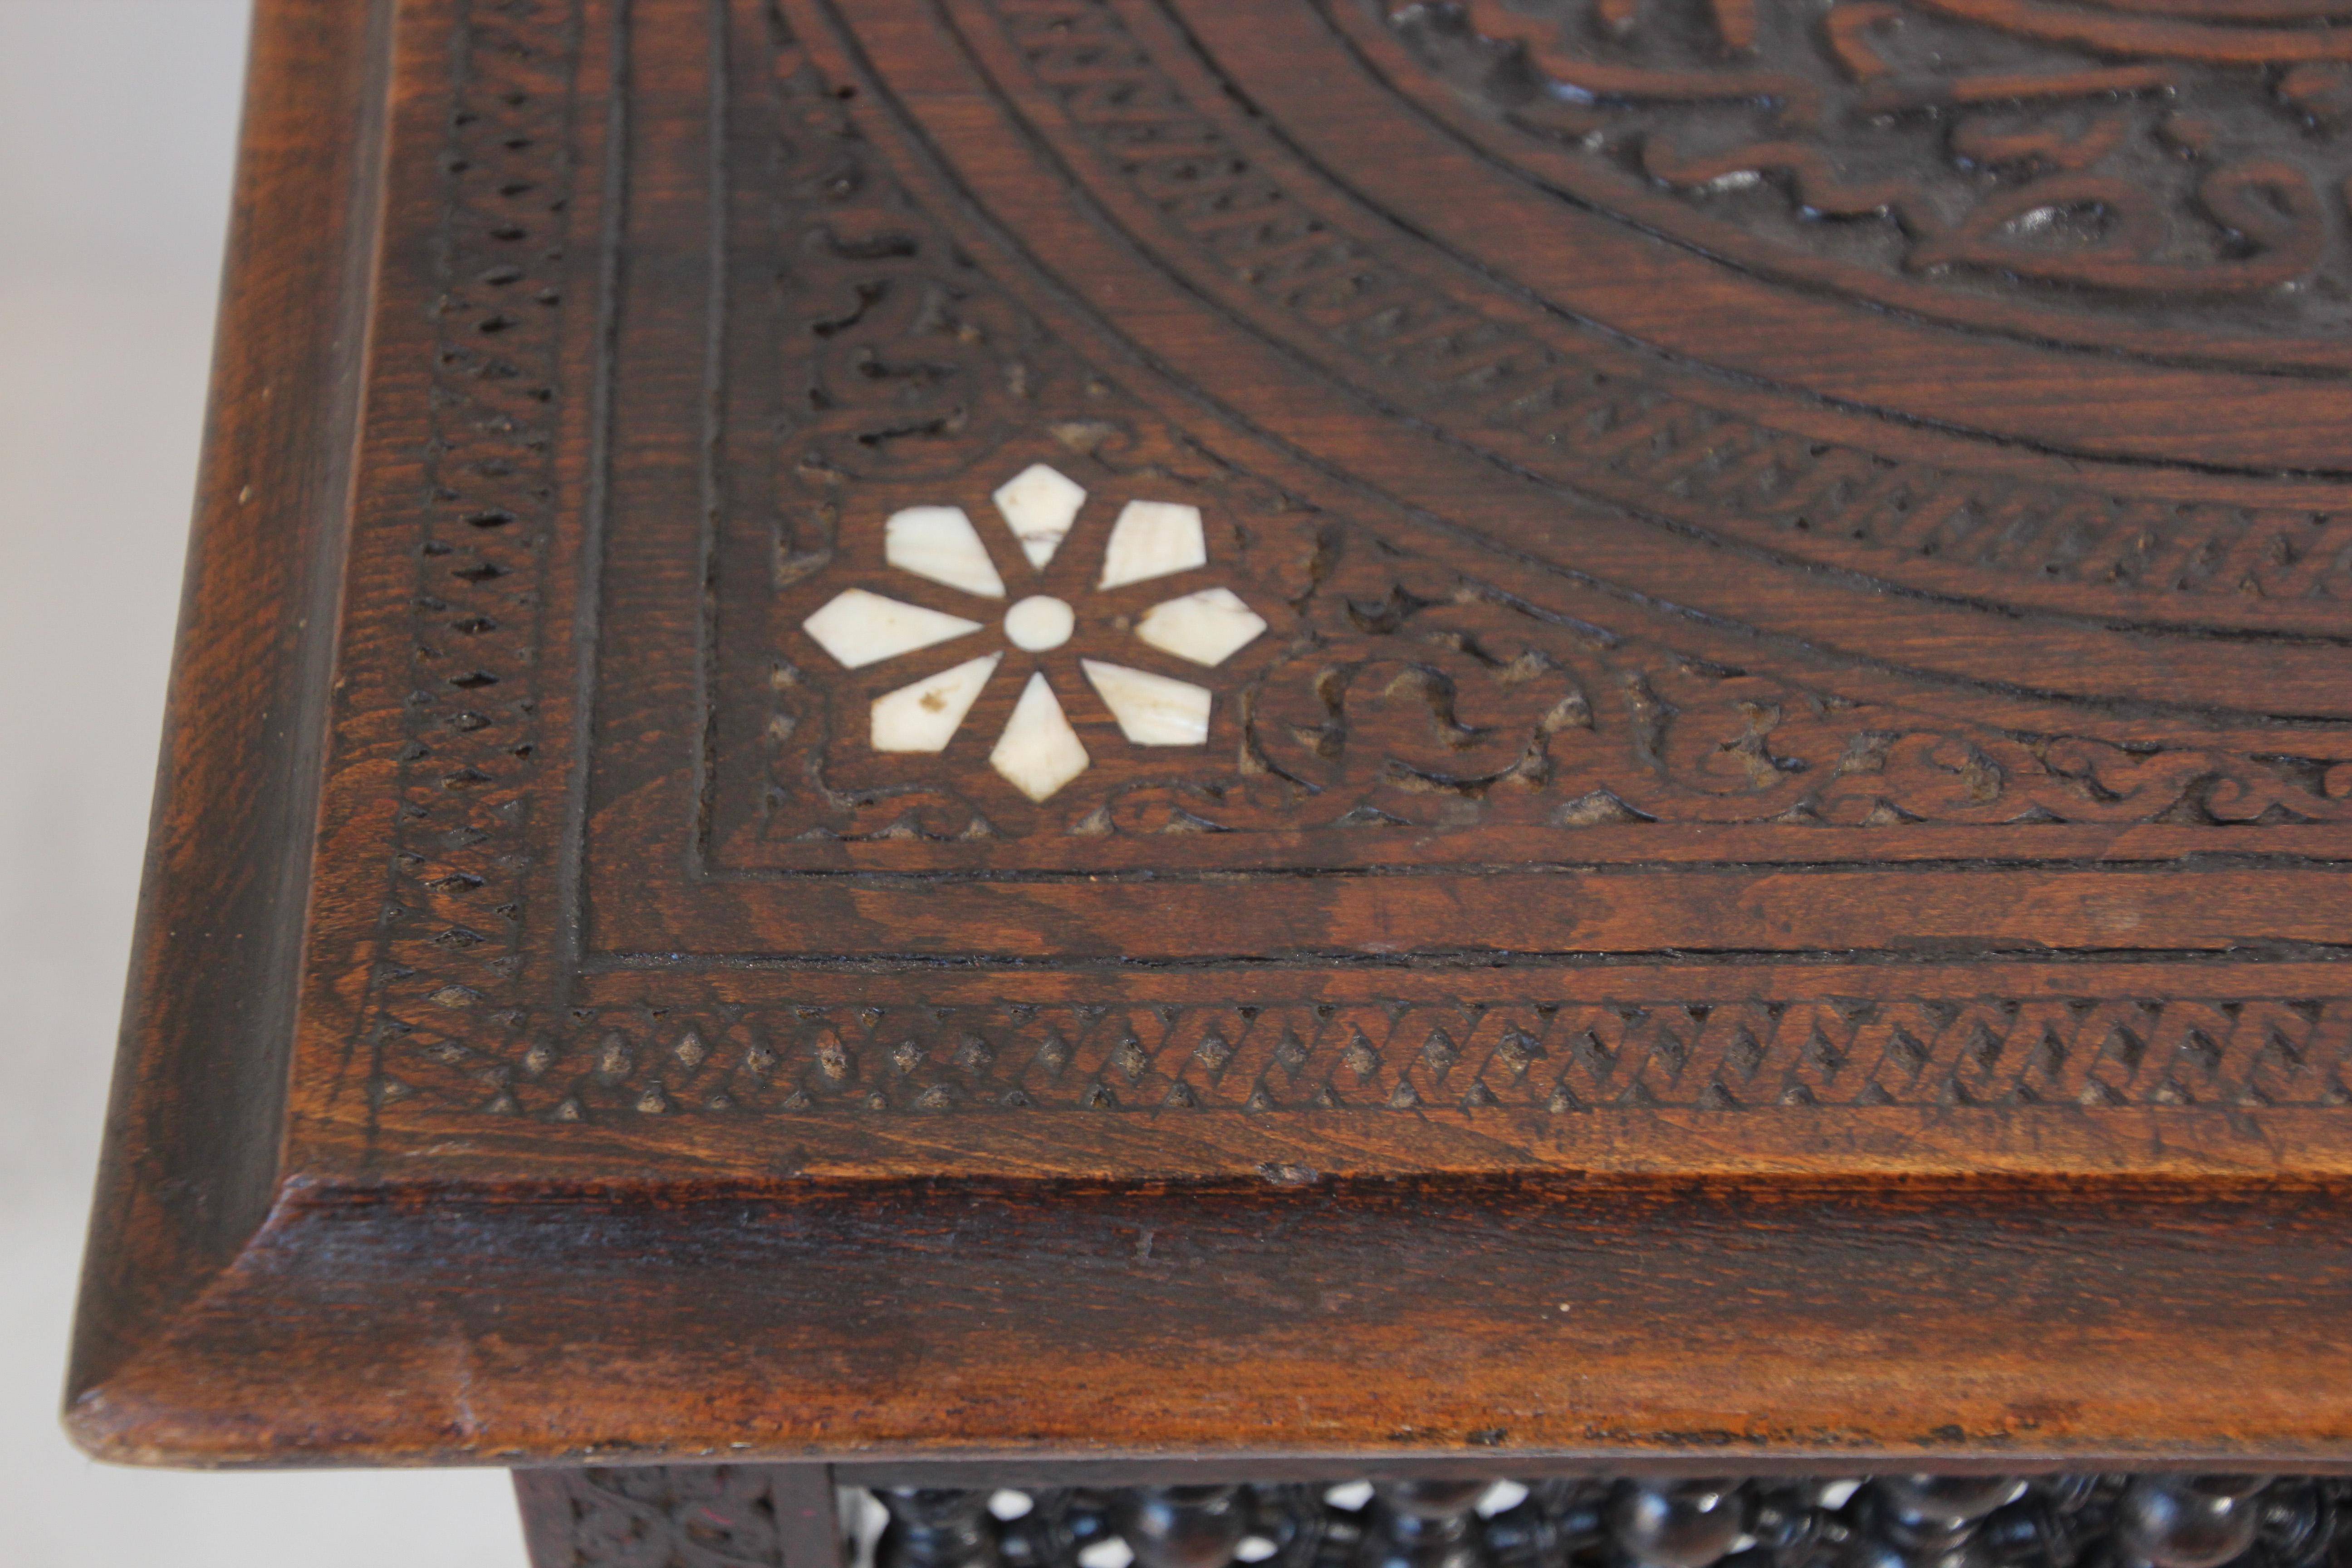 Shell 19th Century Moorish Tea Table Inlaid with Mother of Pearl